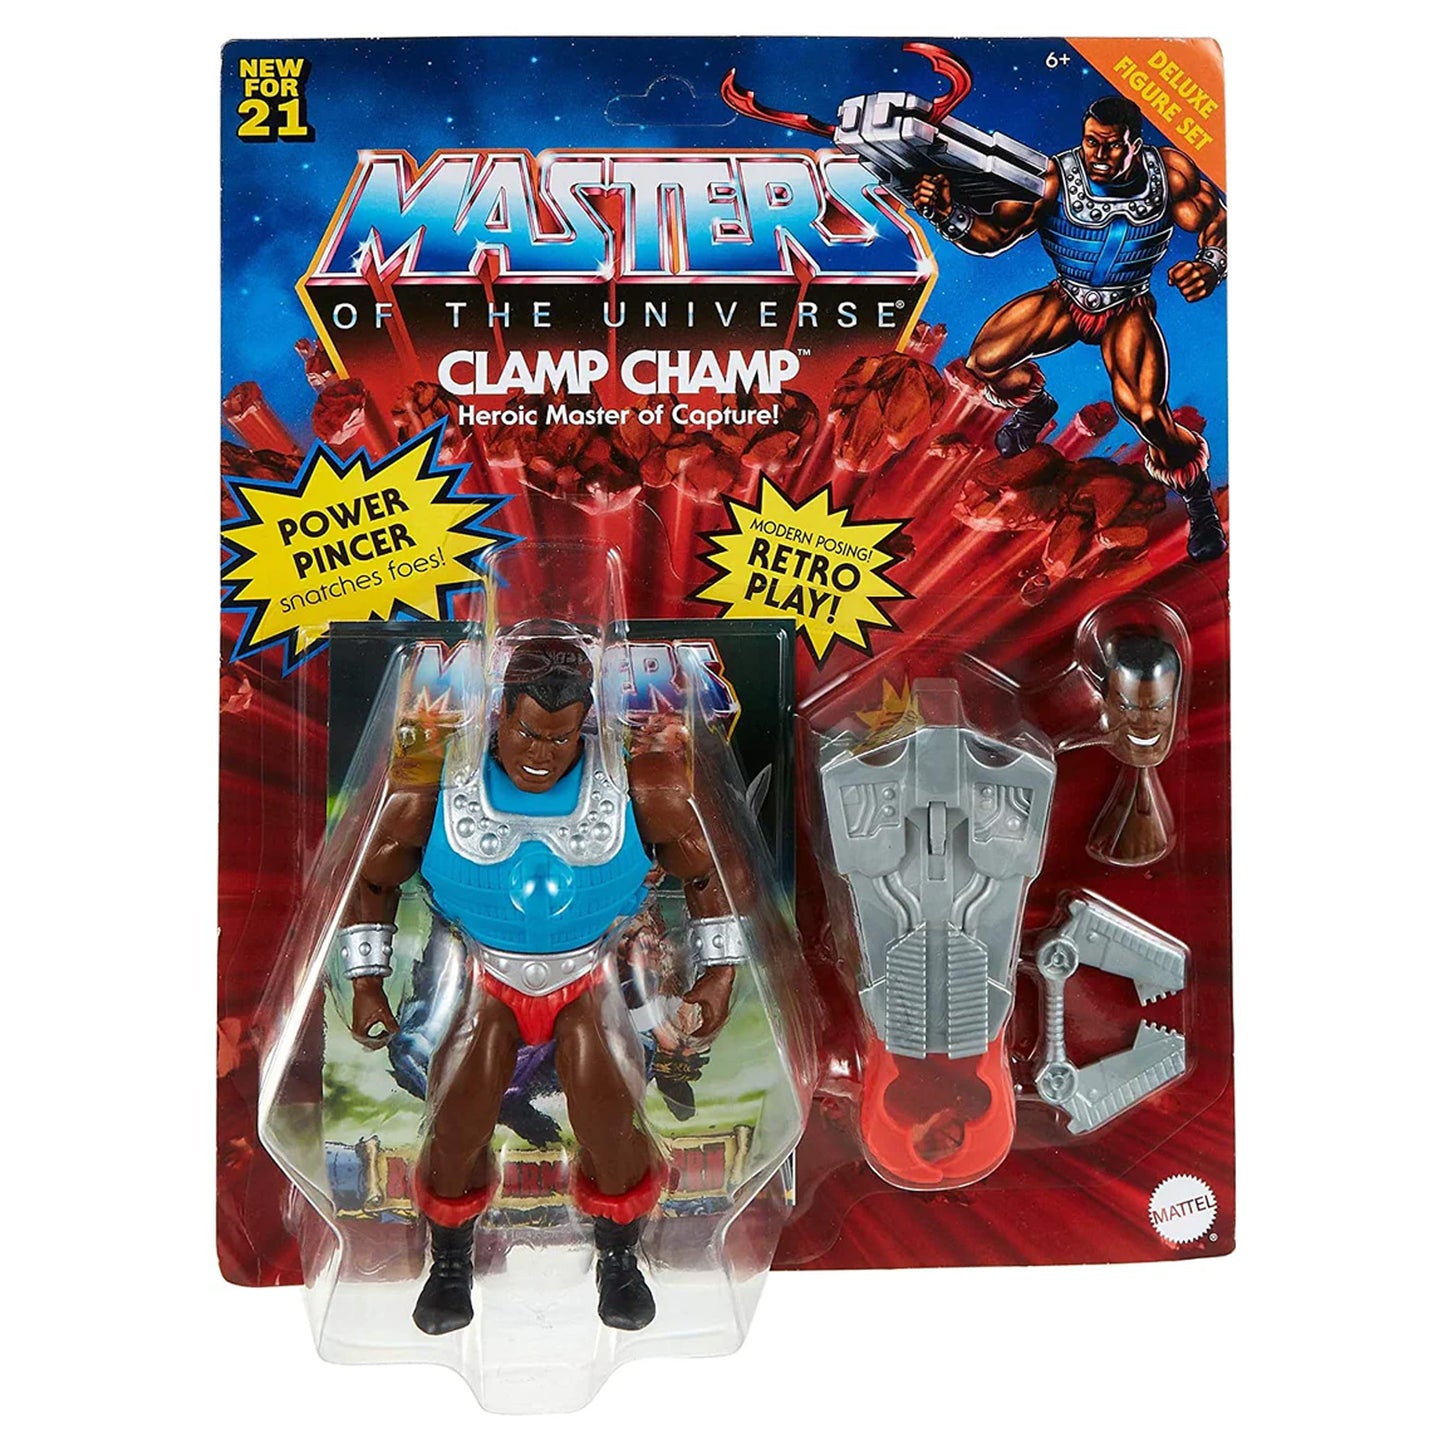 Masters of The Universe Clamp Champ Deluxe (version americana)